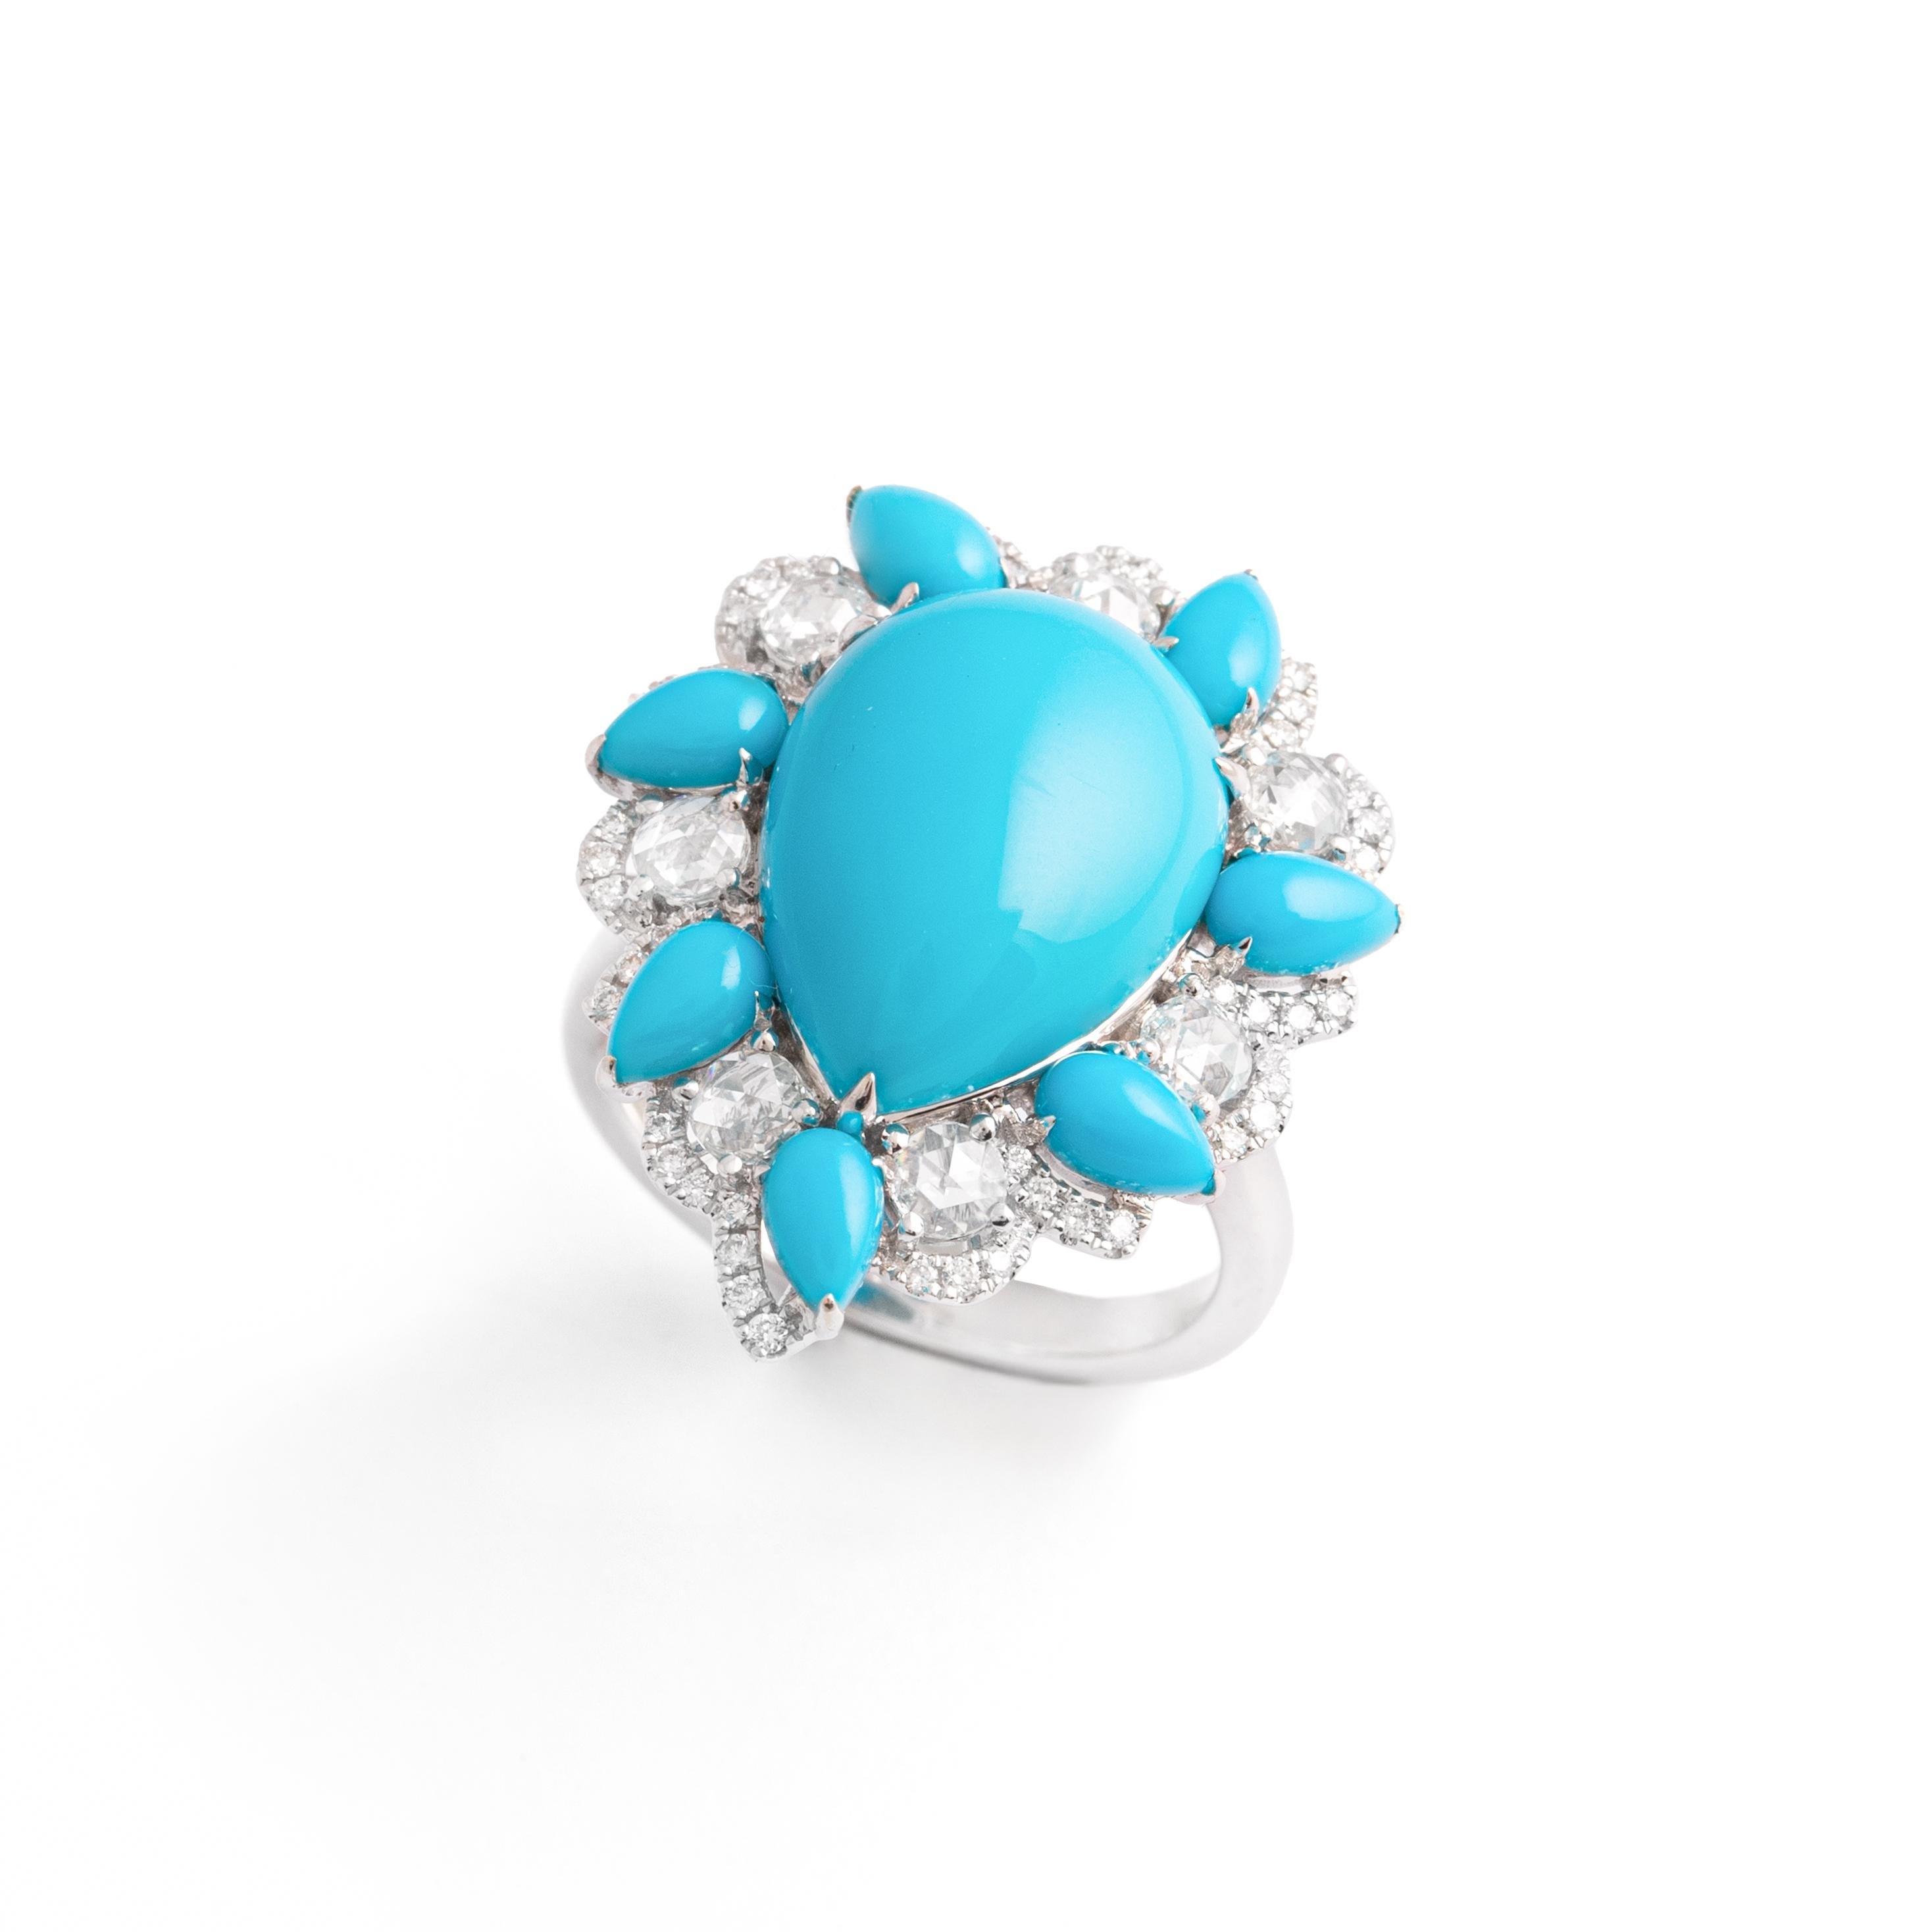 5.69 carat Turquoise cabochon pear shape surrounded by marquise shape Turquoise and Rose cut 0.46 carat and Round cut 0.18 carat Diamonds on white gold 18K.
Ring size 6.75.
Dimensions of the main motif: 2.70 x 2.20 centimeters.
Total weight: 8.83